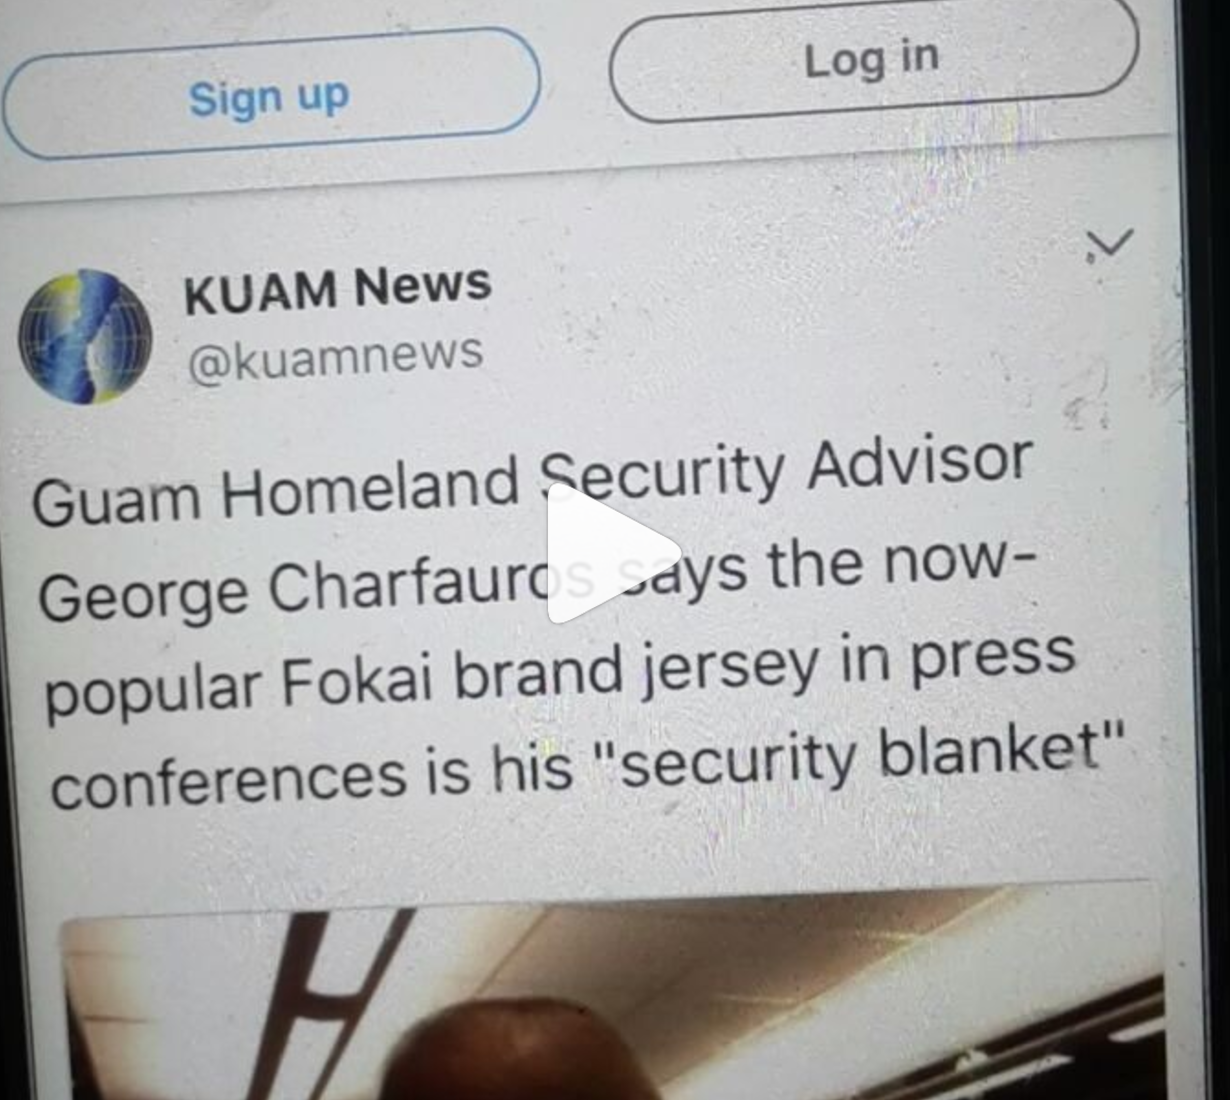 Guam Homeland Security Advisor says Fokai Jersey is his “Security Blanket”